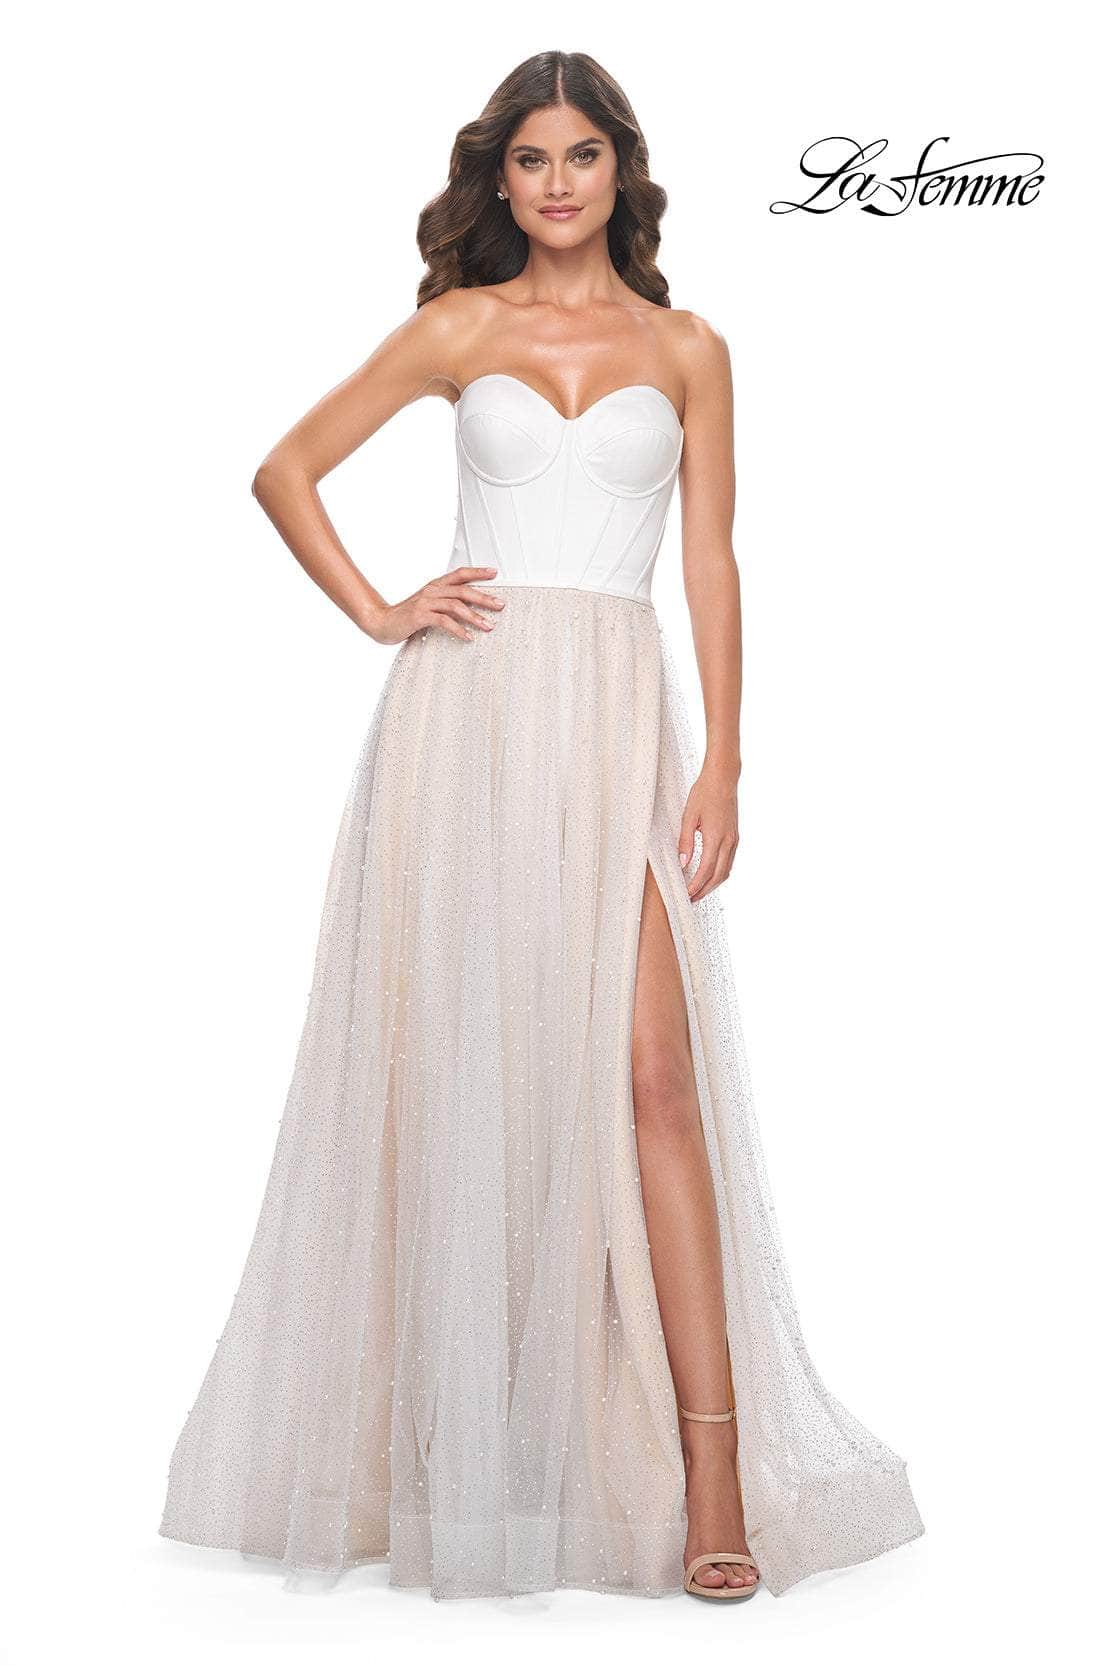 La Femme 32149 - Sweetheart Strapless Prom Gown
